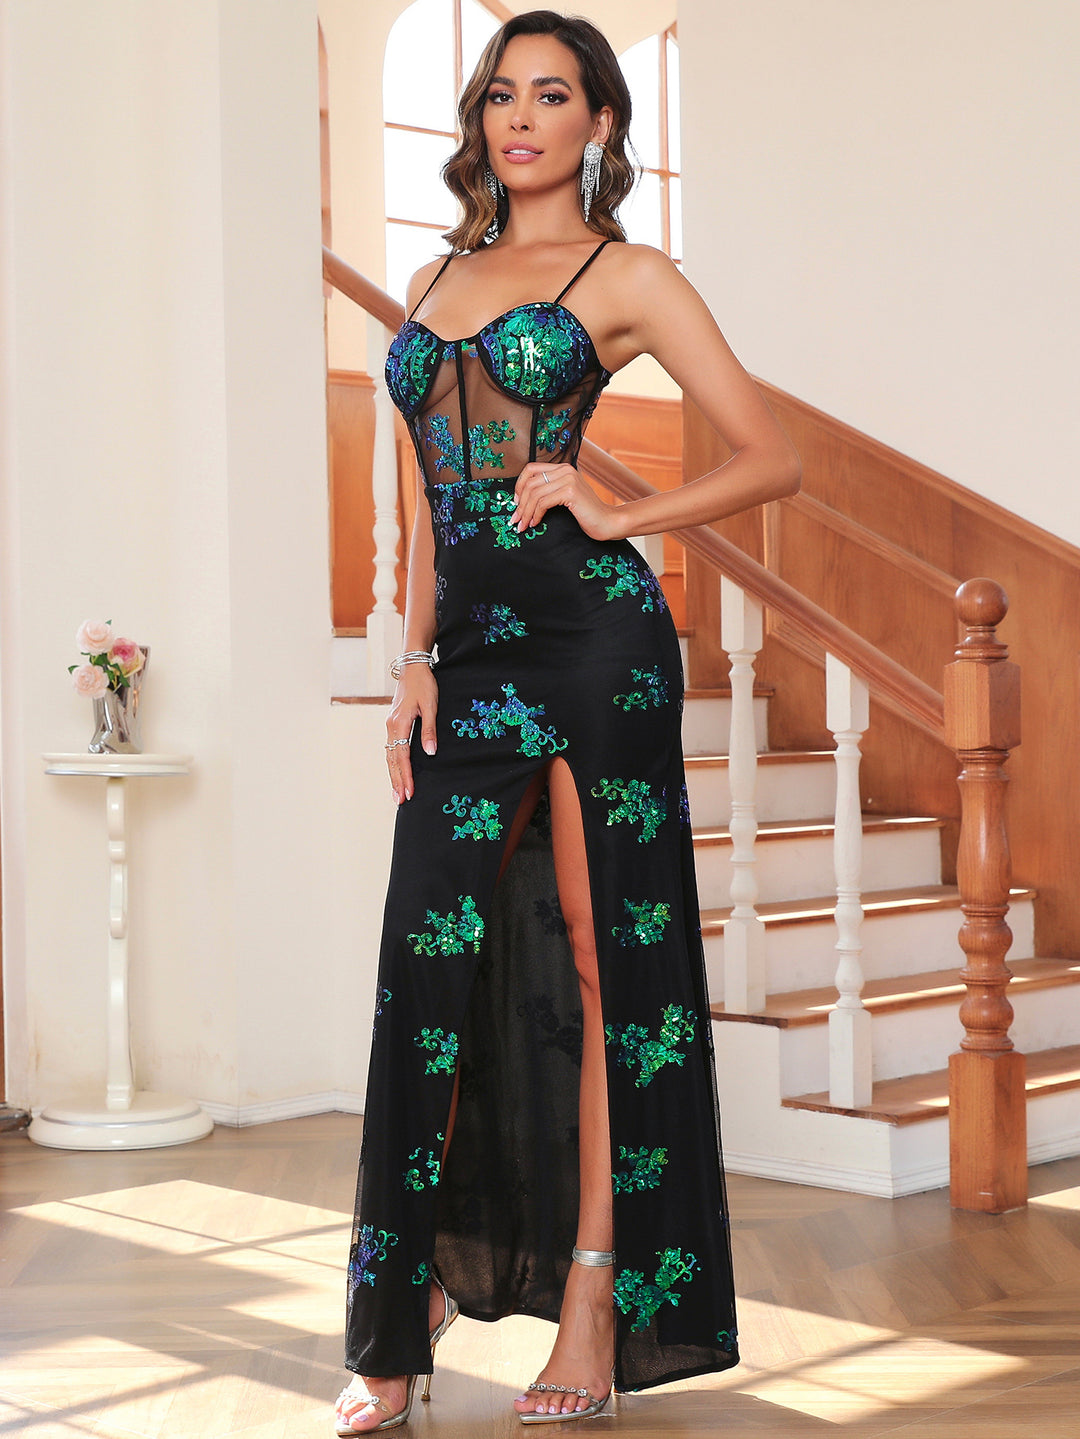 Sexy See Through Green Sequ Dress Women Clothing Party Evening Dress